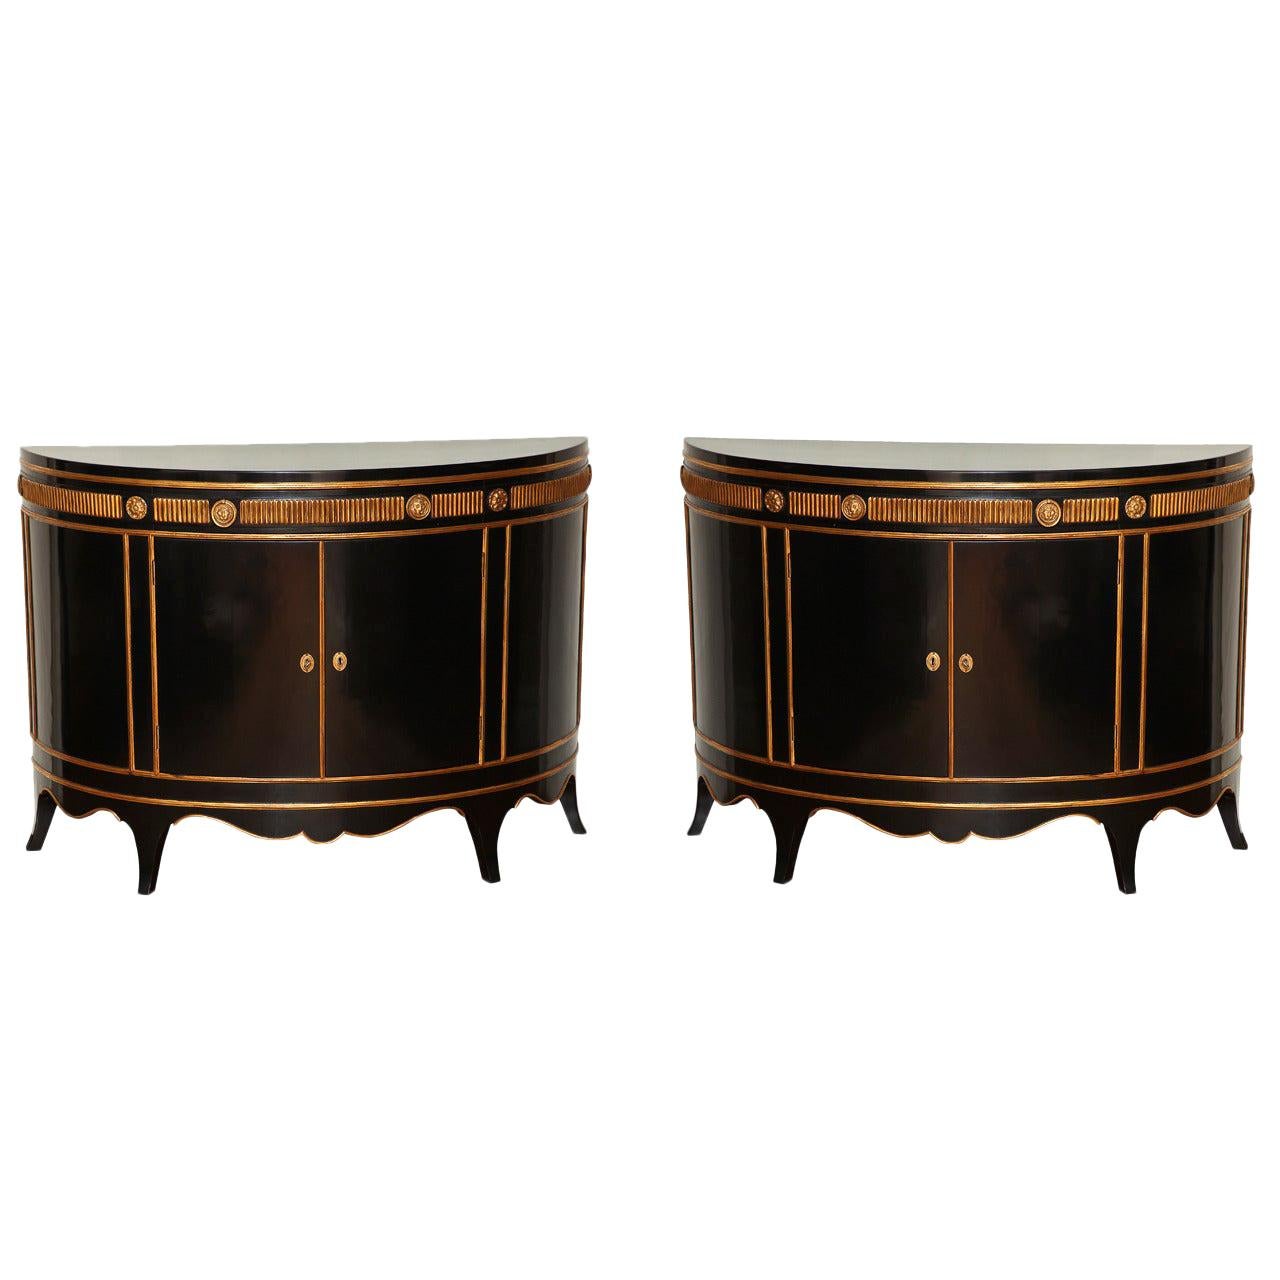 Pair of Hollywood Regency Demi-Lune Cabinets